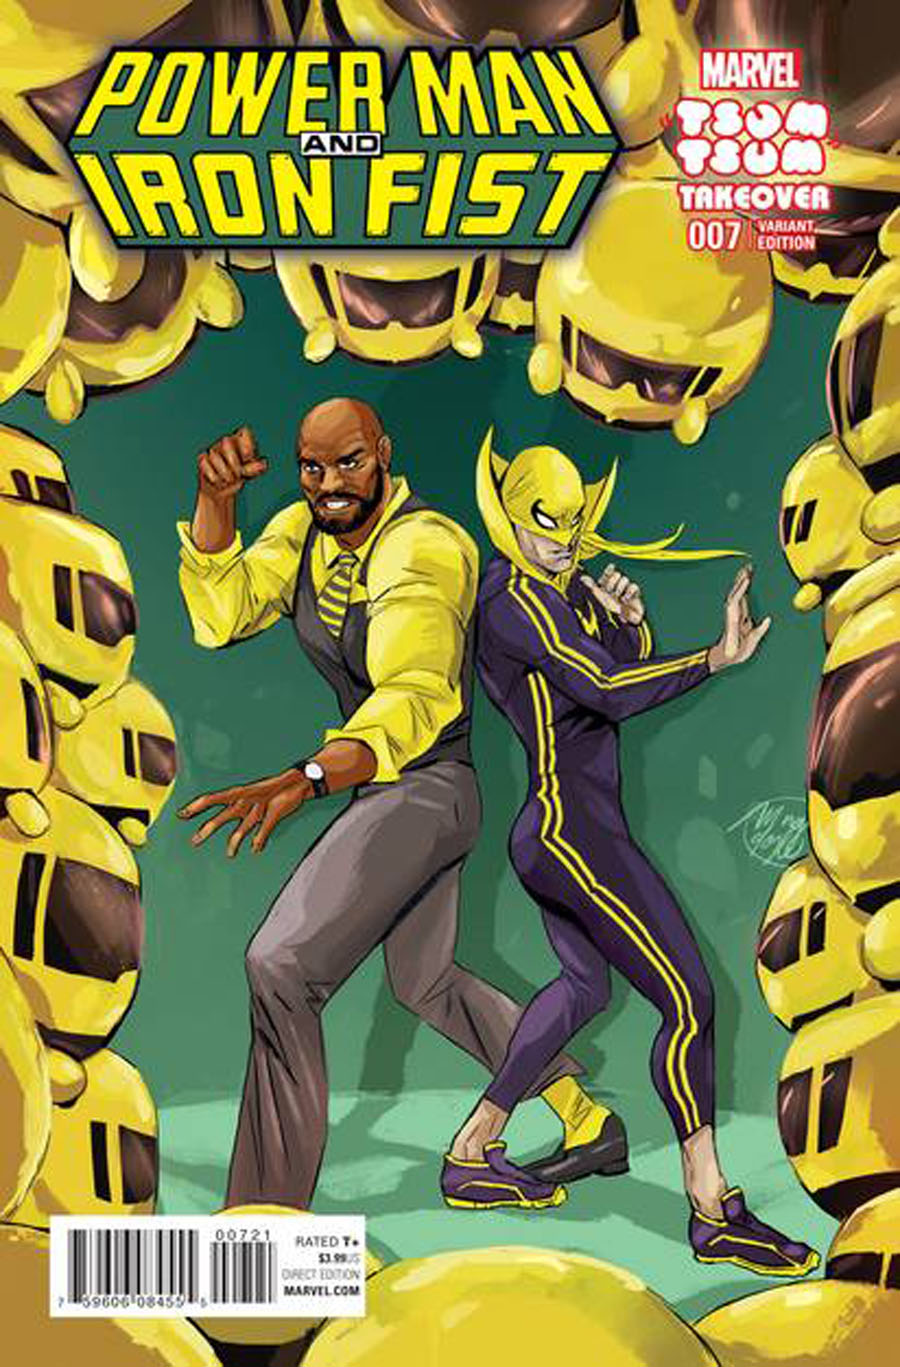 Power Man And Iron Fist Vol 3 #7 Cover B Variant Ming Doyle Marvel Tsum Tsum Takeover Cover (Civil War II Tie-In)